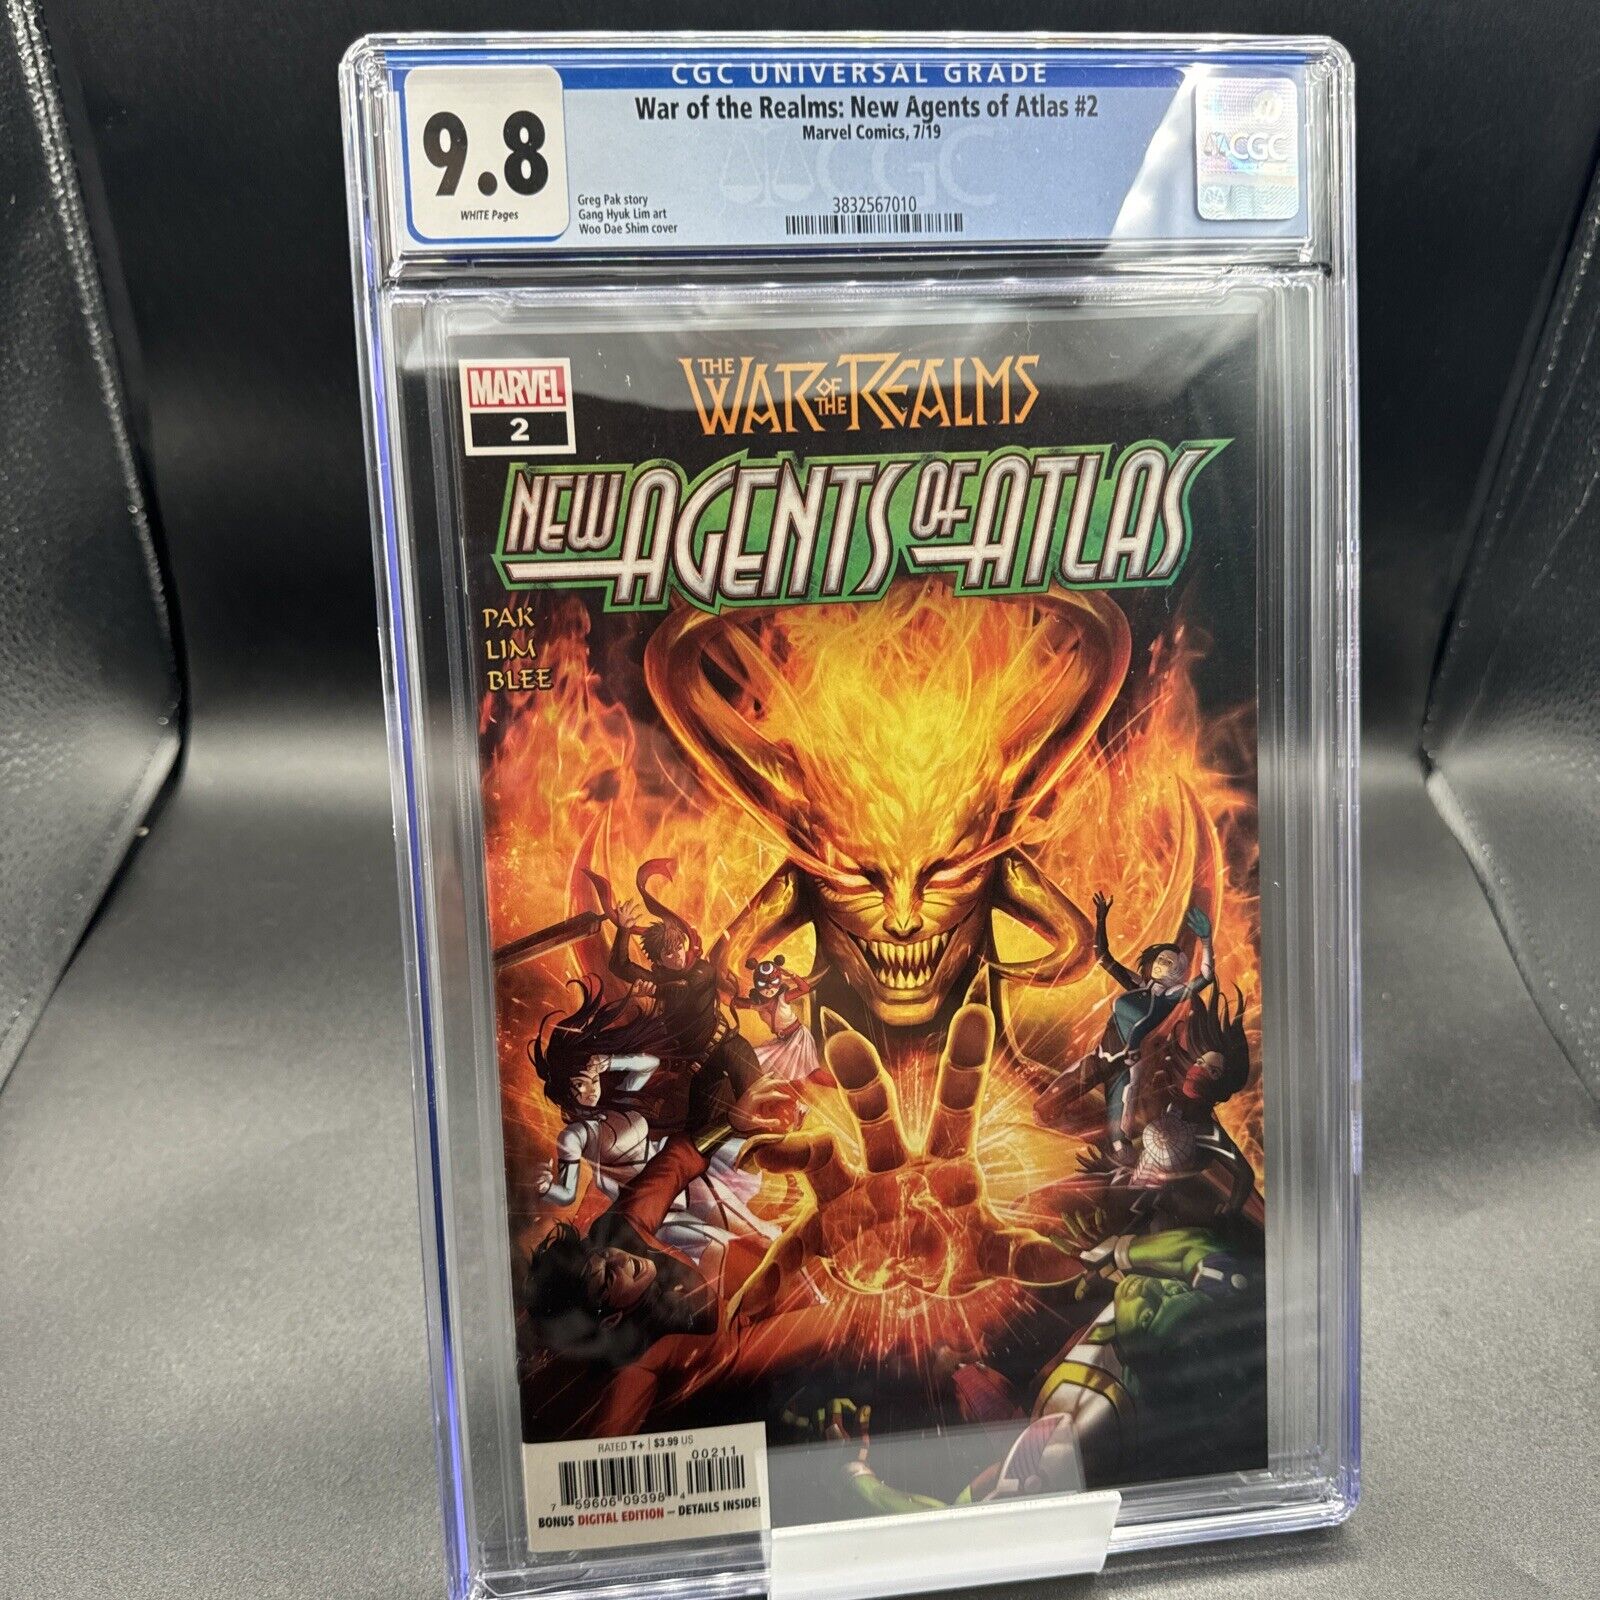 NEW AGENTS OF ATLAS #2 WAR OF THE REALMS CGC 9.8 1st APPEARANCE OF SWORDMASTER